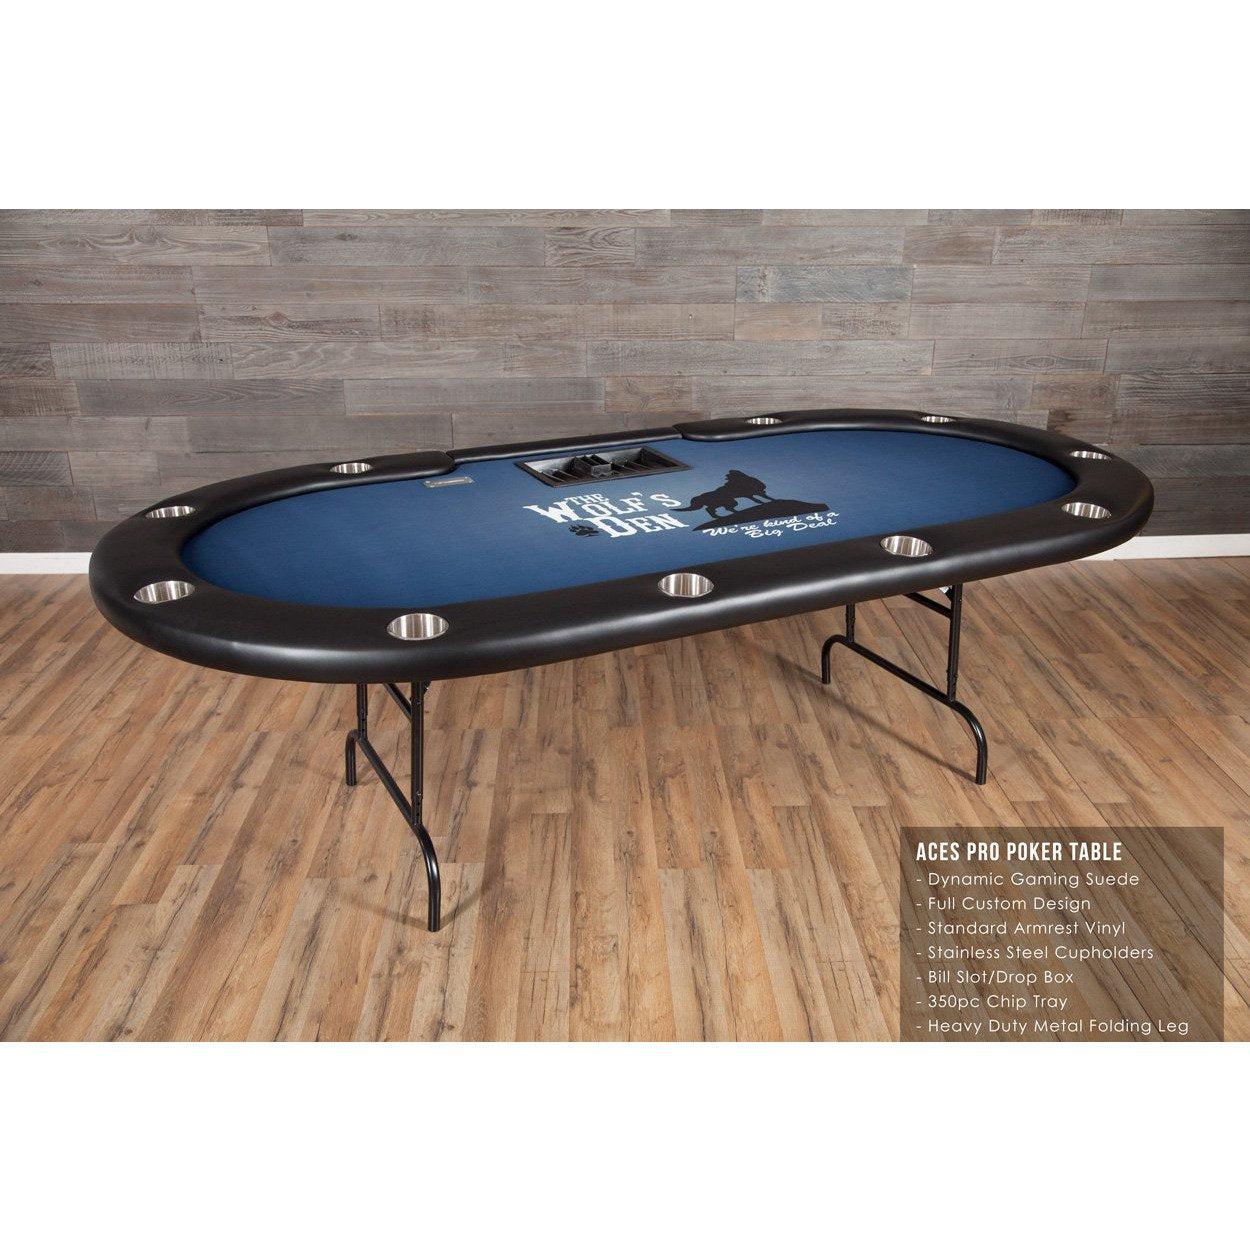 BBO POKER TABLE ACES PRO DYNAMIC GAMING SUEDE